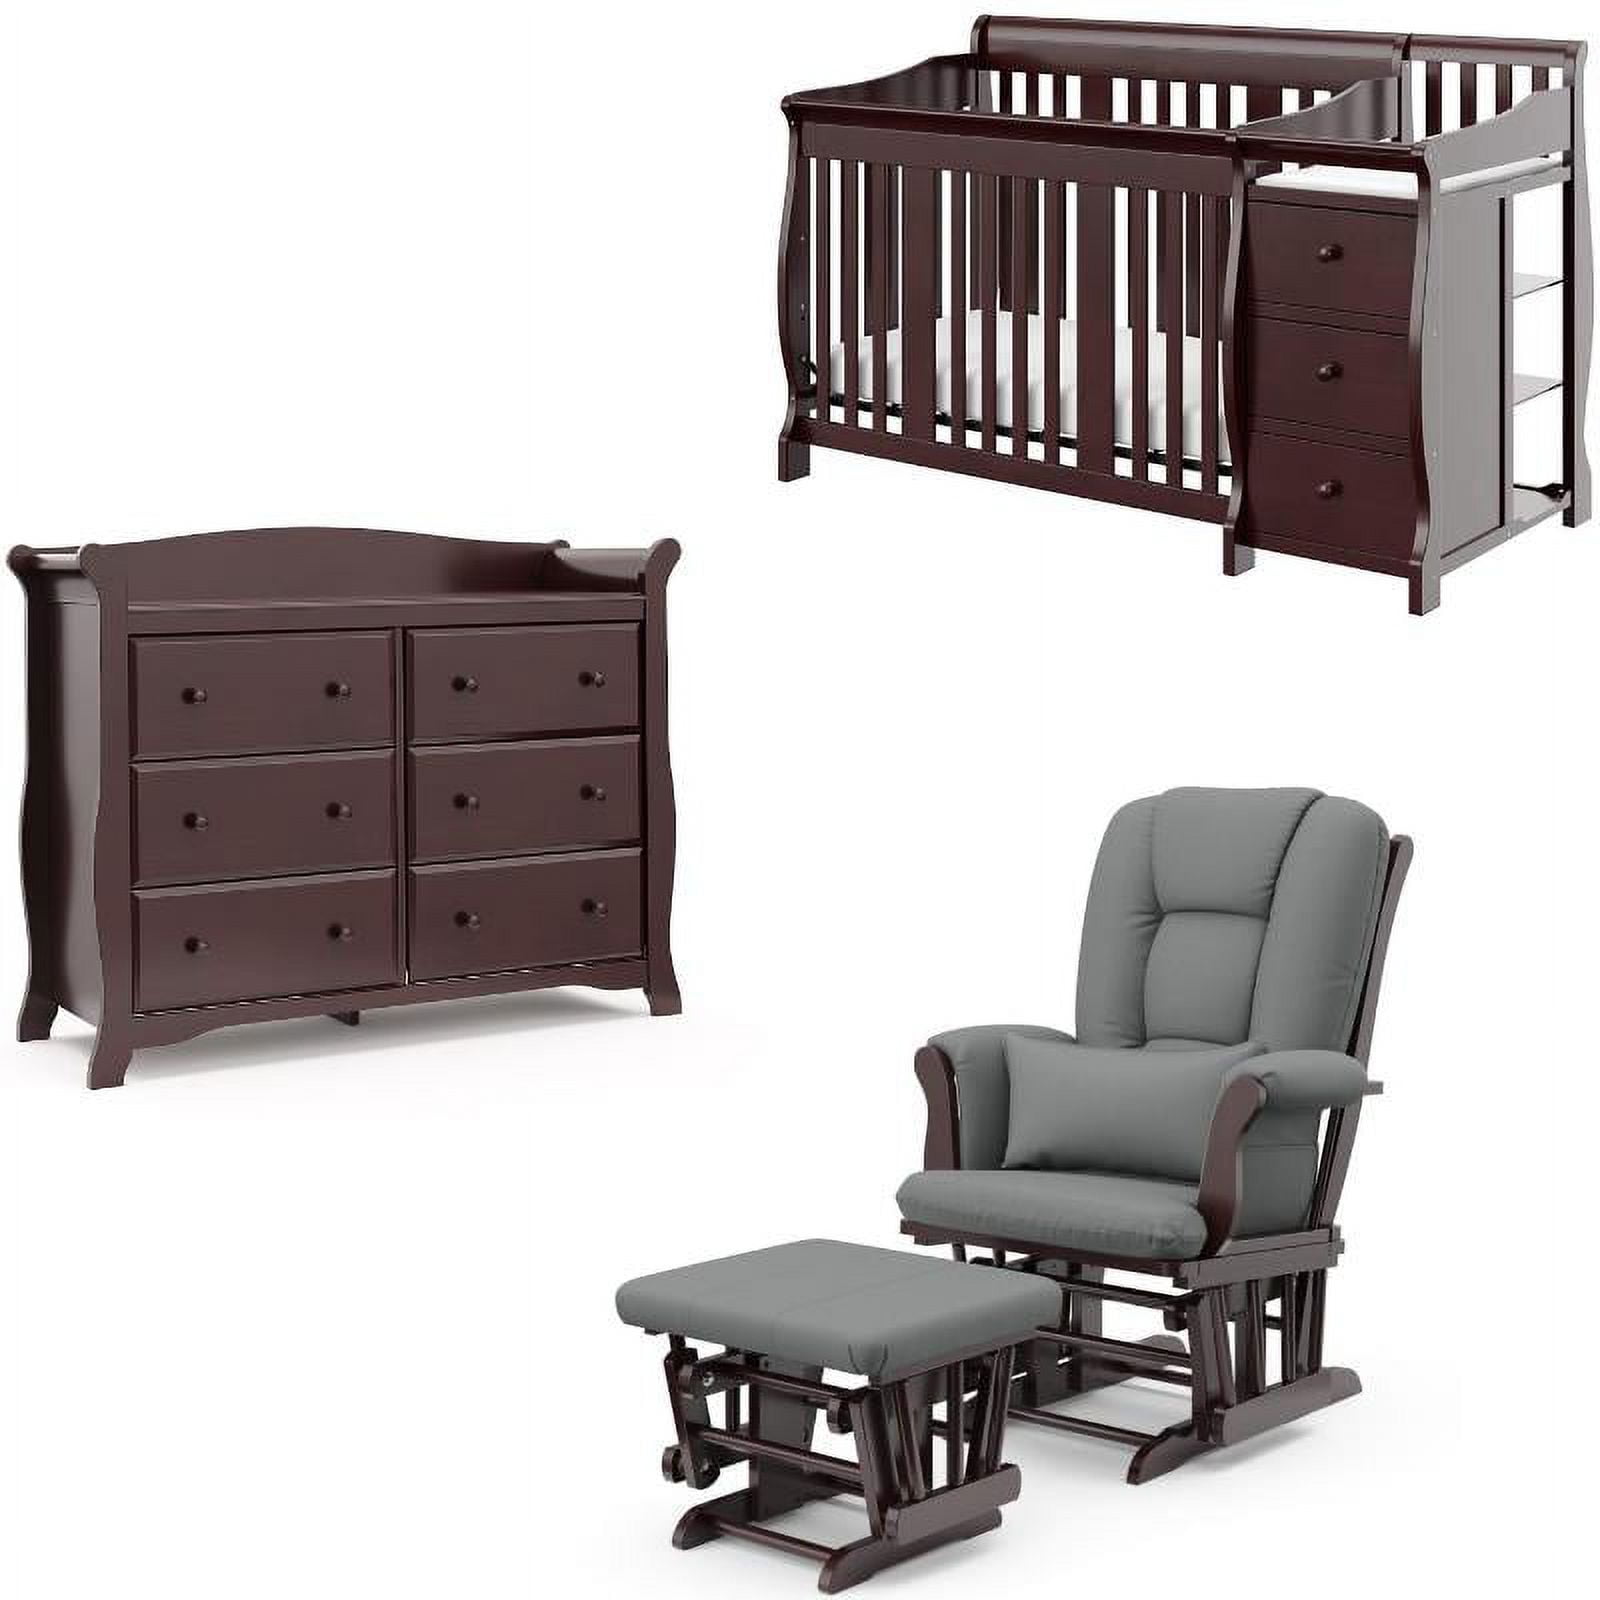 Home Square 3-Piece Crib and Changing Table Set with Dresser and Glider Ottoman